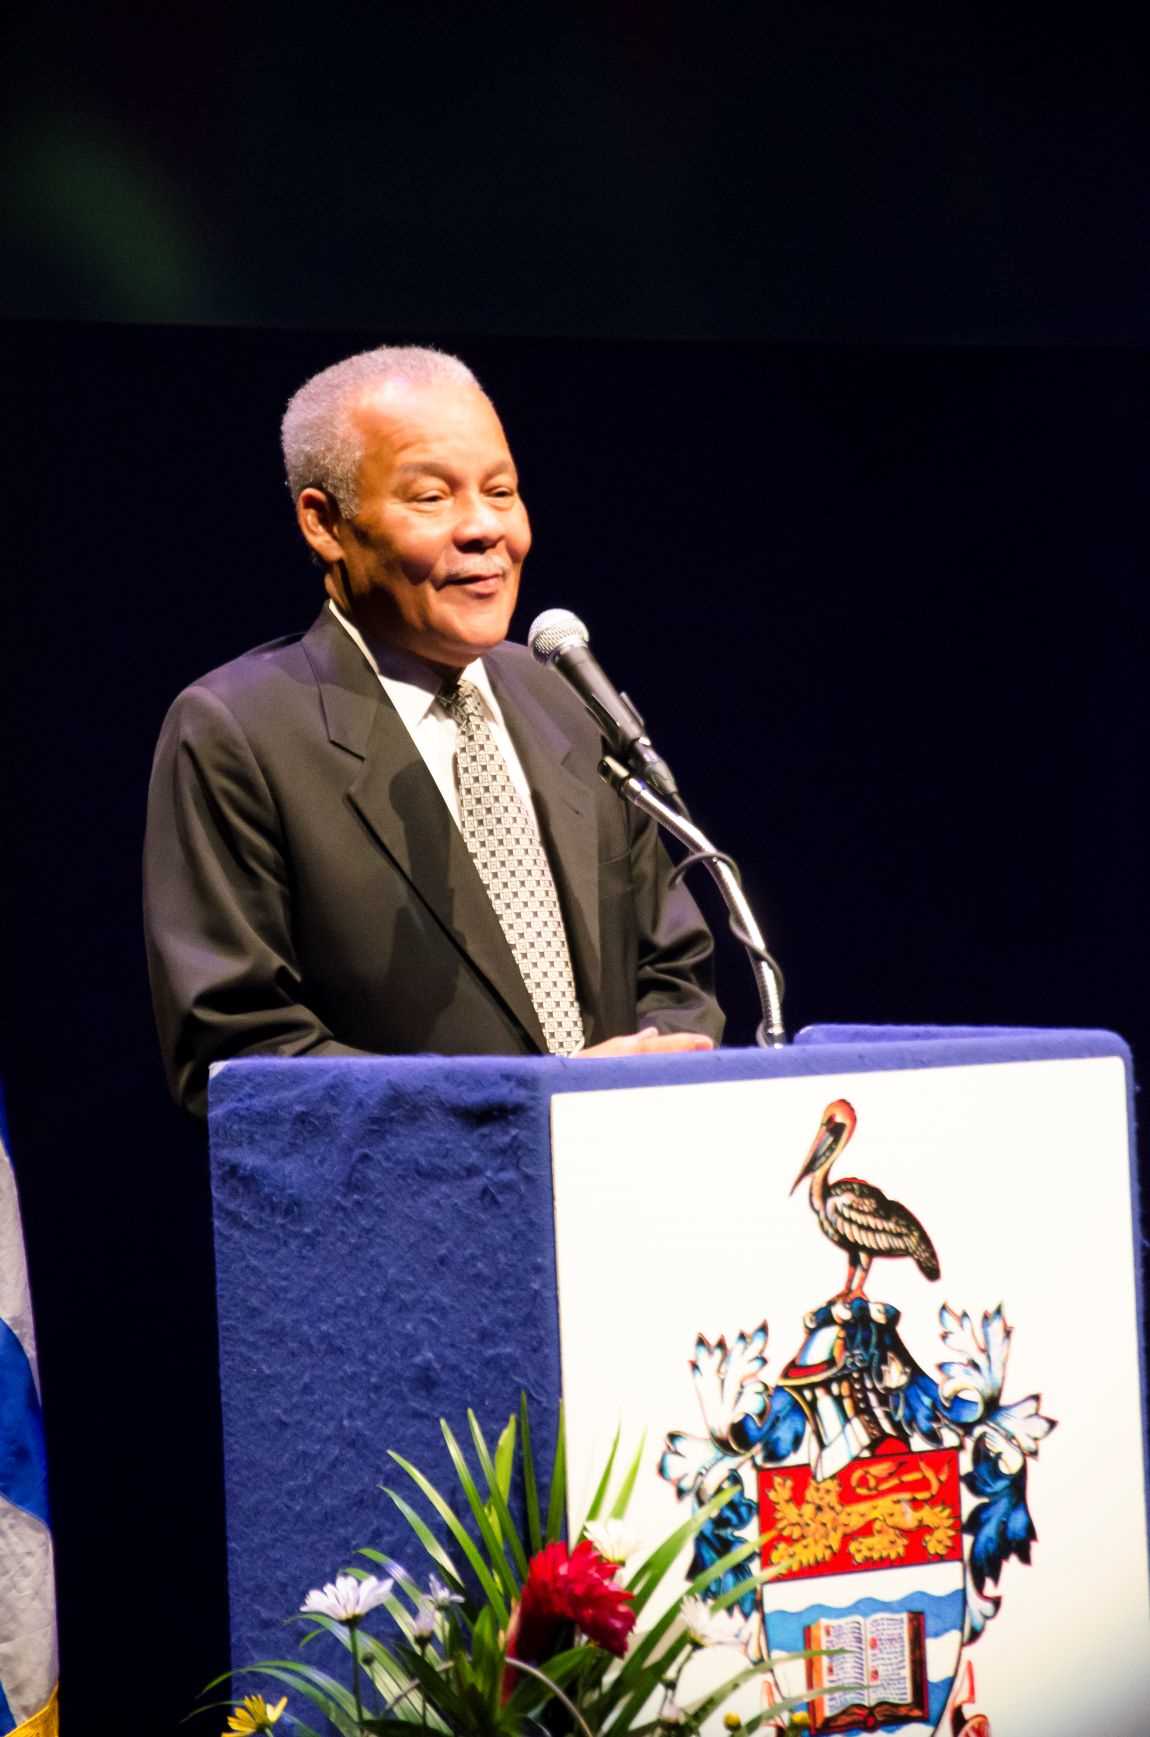 Former Prime Minister the Rt. Hon Owen Arthur, pictured speaking in his capacity as Patron of The UWI Global Giving’s 2016 launch event at the Cave Hill Campus.